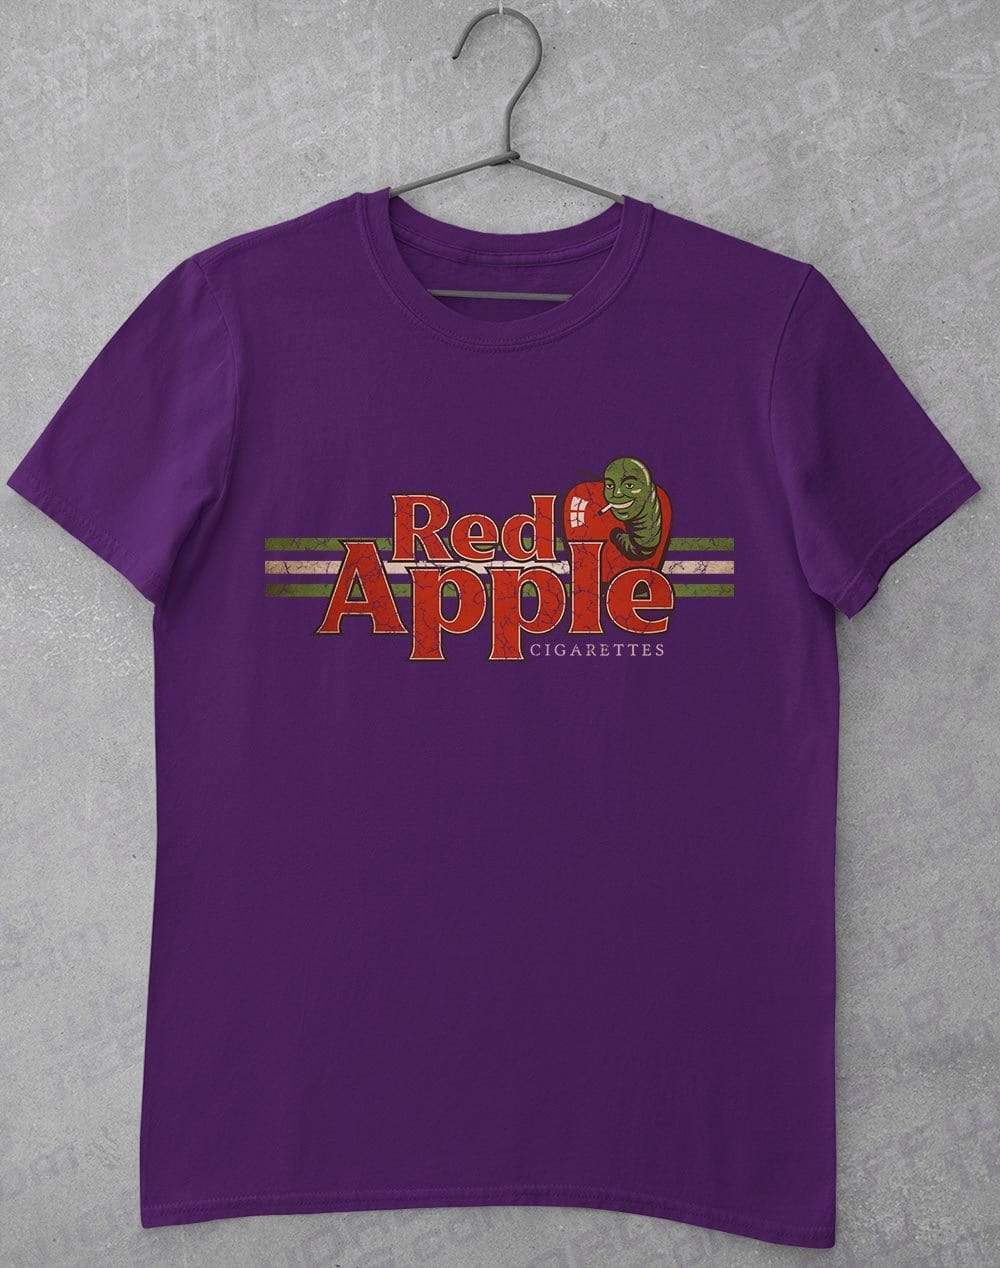 Red Apple Cigarettes T-Shirt S / Purple  - Off World Tees